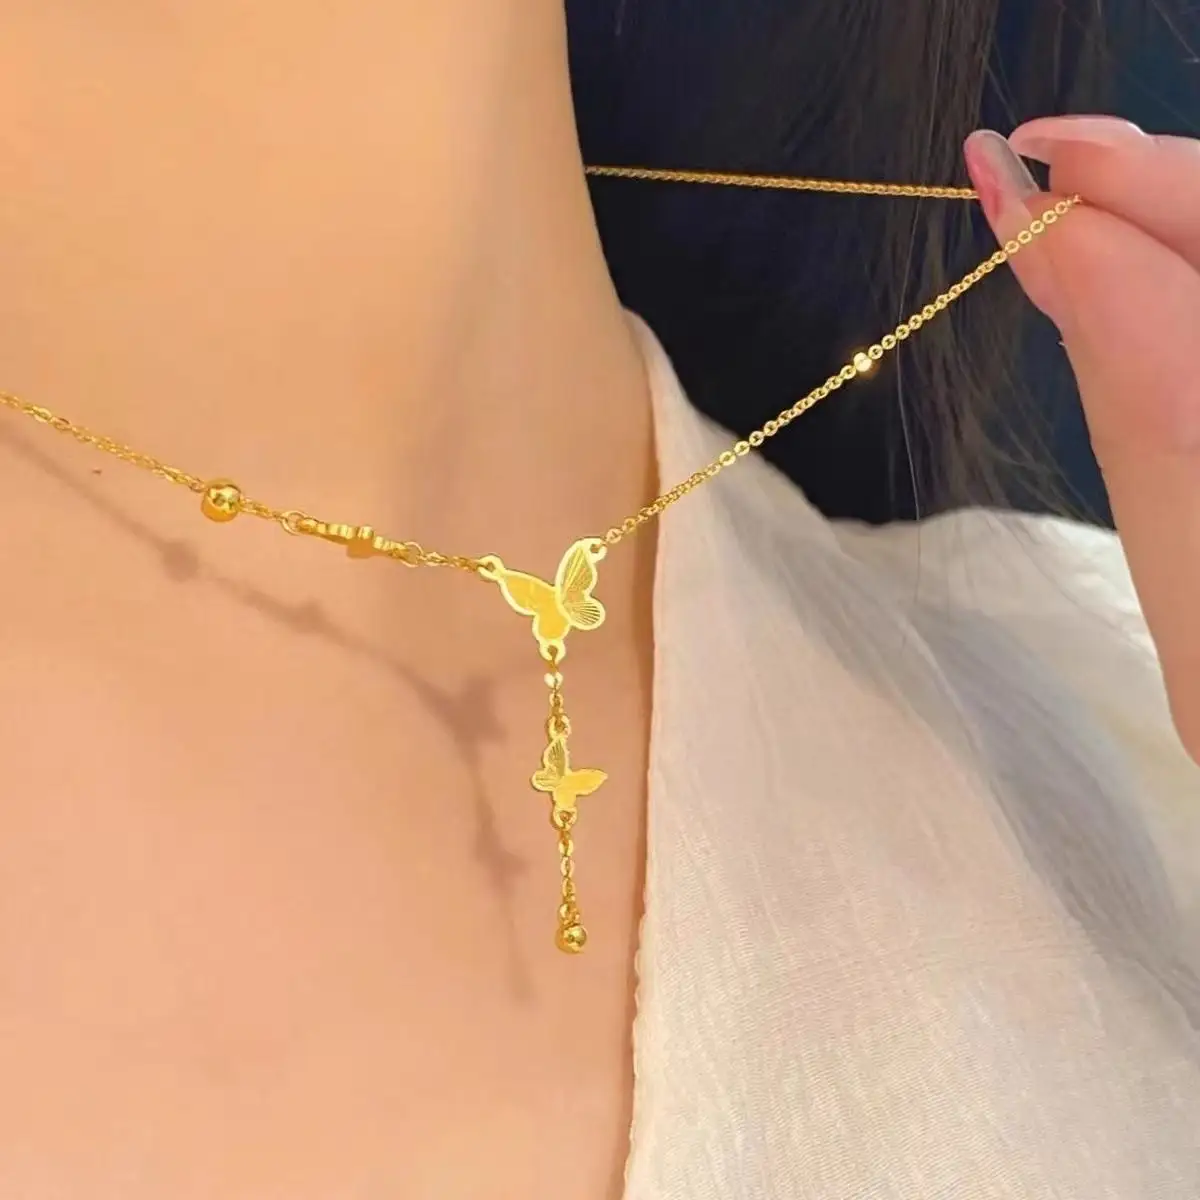 Fashion Butterfly Necklace Jewelry for Women Gold Plated stainless steel Long Tassel Necklace Pendant